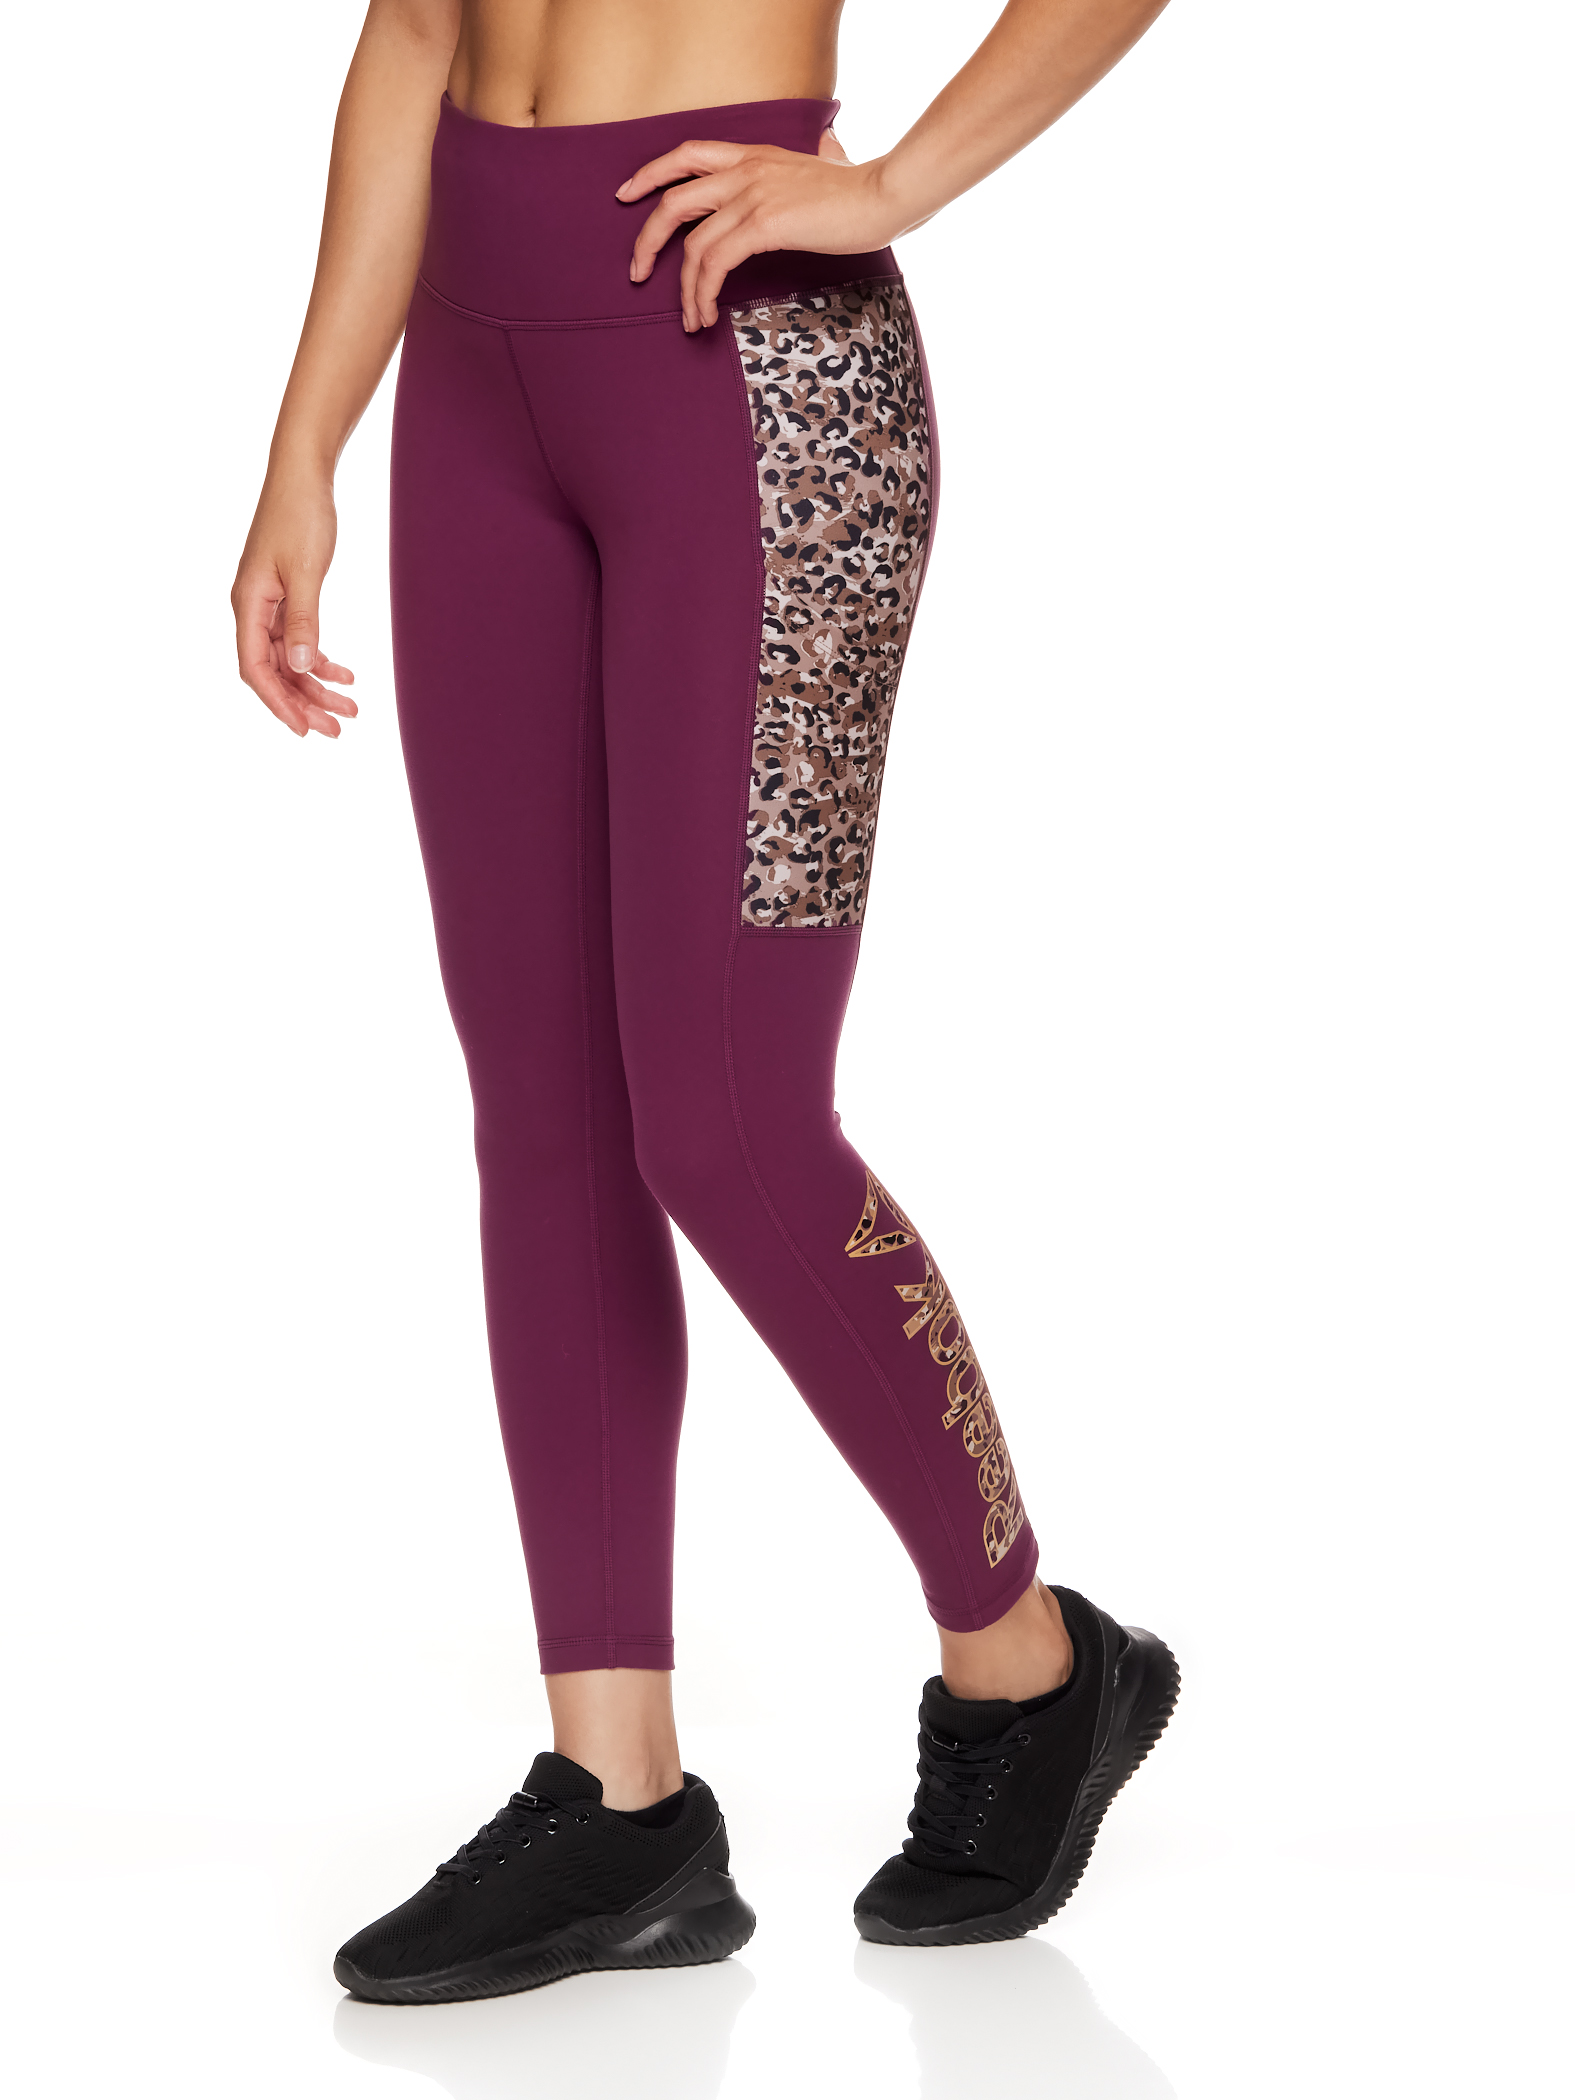 Reebok Women's Printed Motion High Rise 7/8 Legging with Side Pocket - image 1 of 4